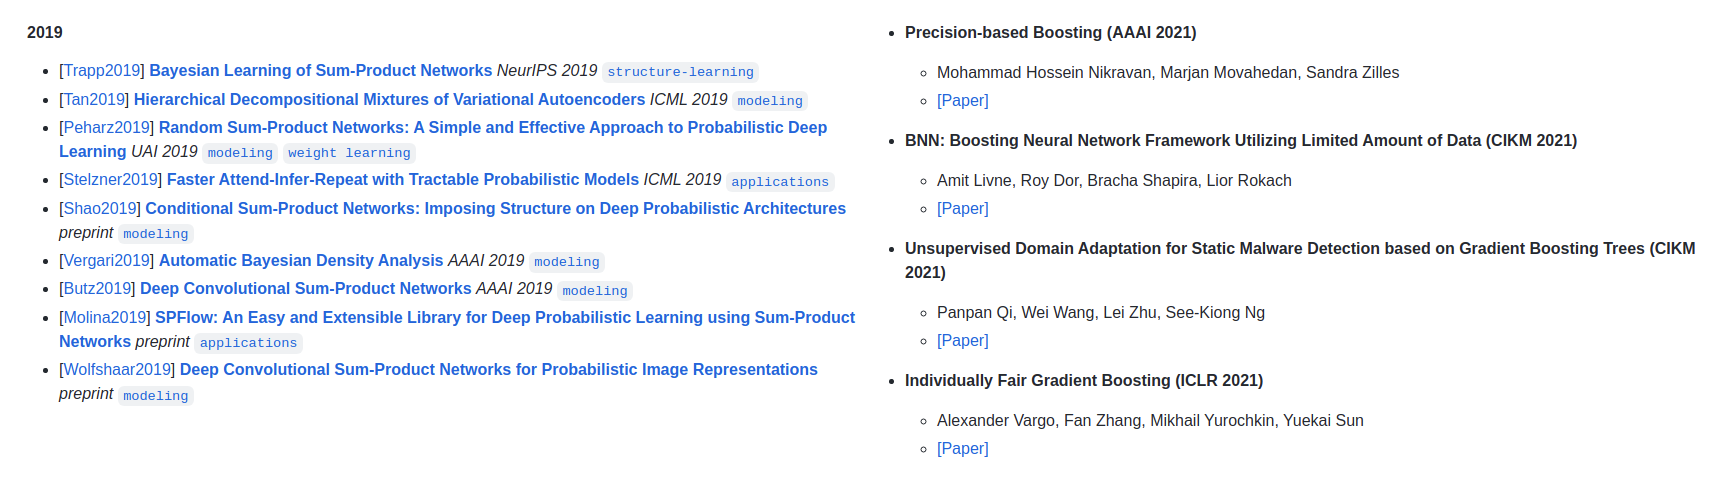 Screenshots from two lists. The left shows a list of sum-product network papers from 2019. The right shows gradient boosting papers from 2021.